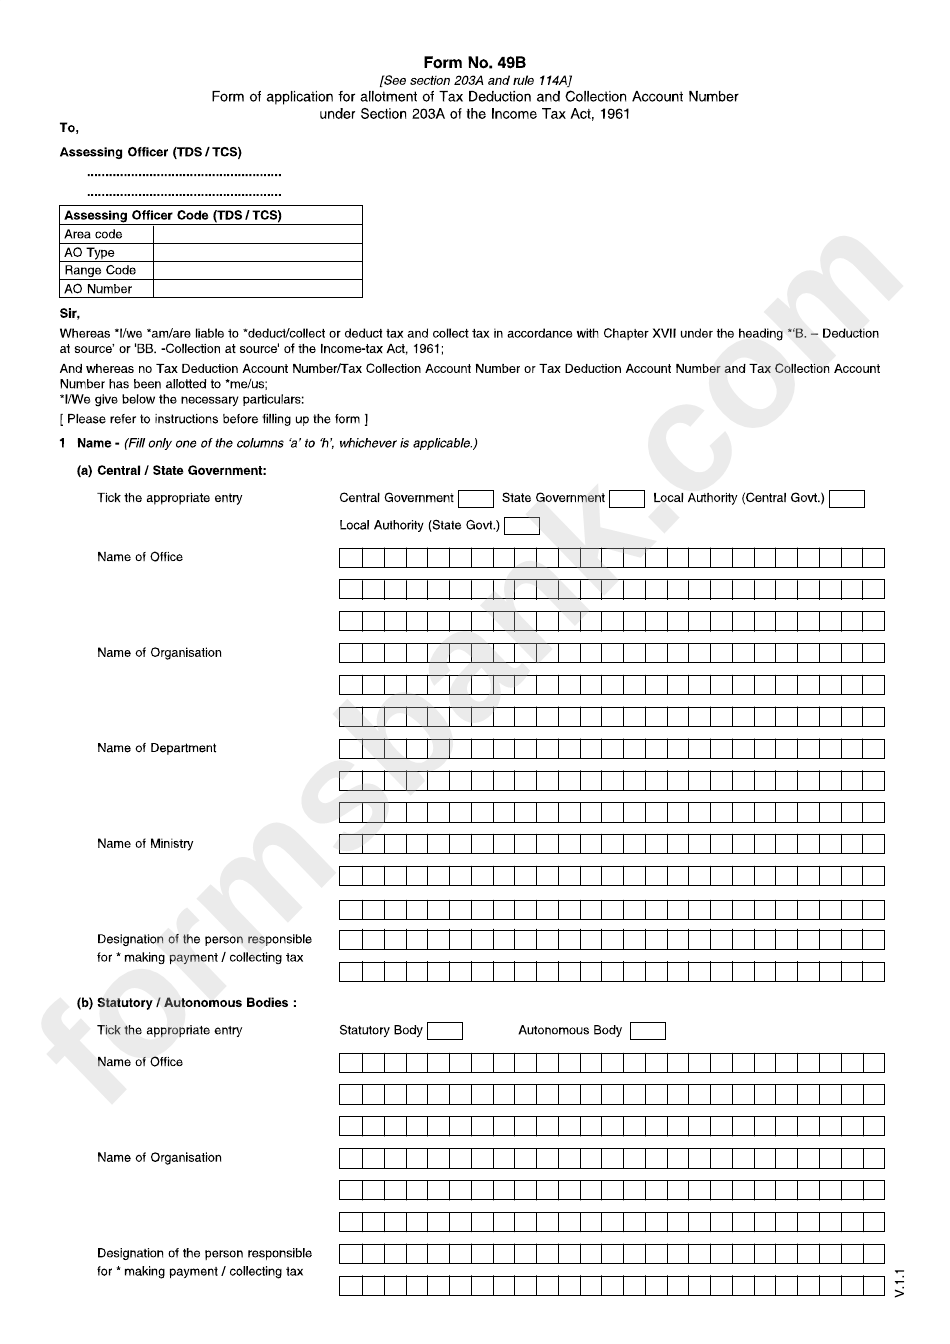 Form 49b - Form Of Application For Allotment Of Tax Deduction And Collection Account Number